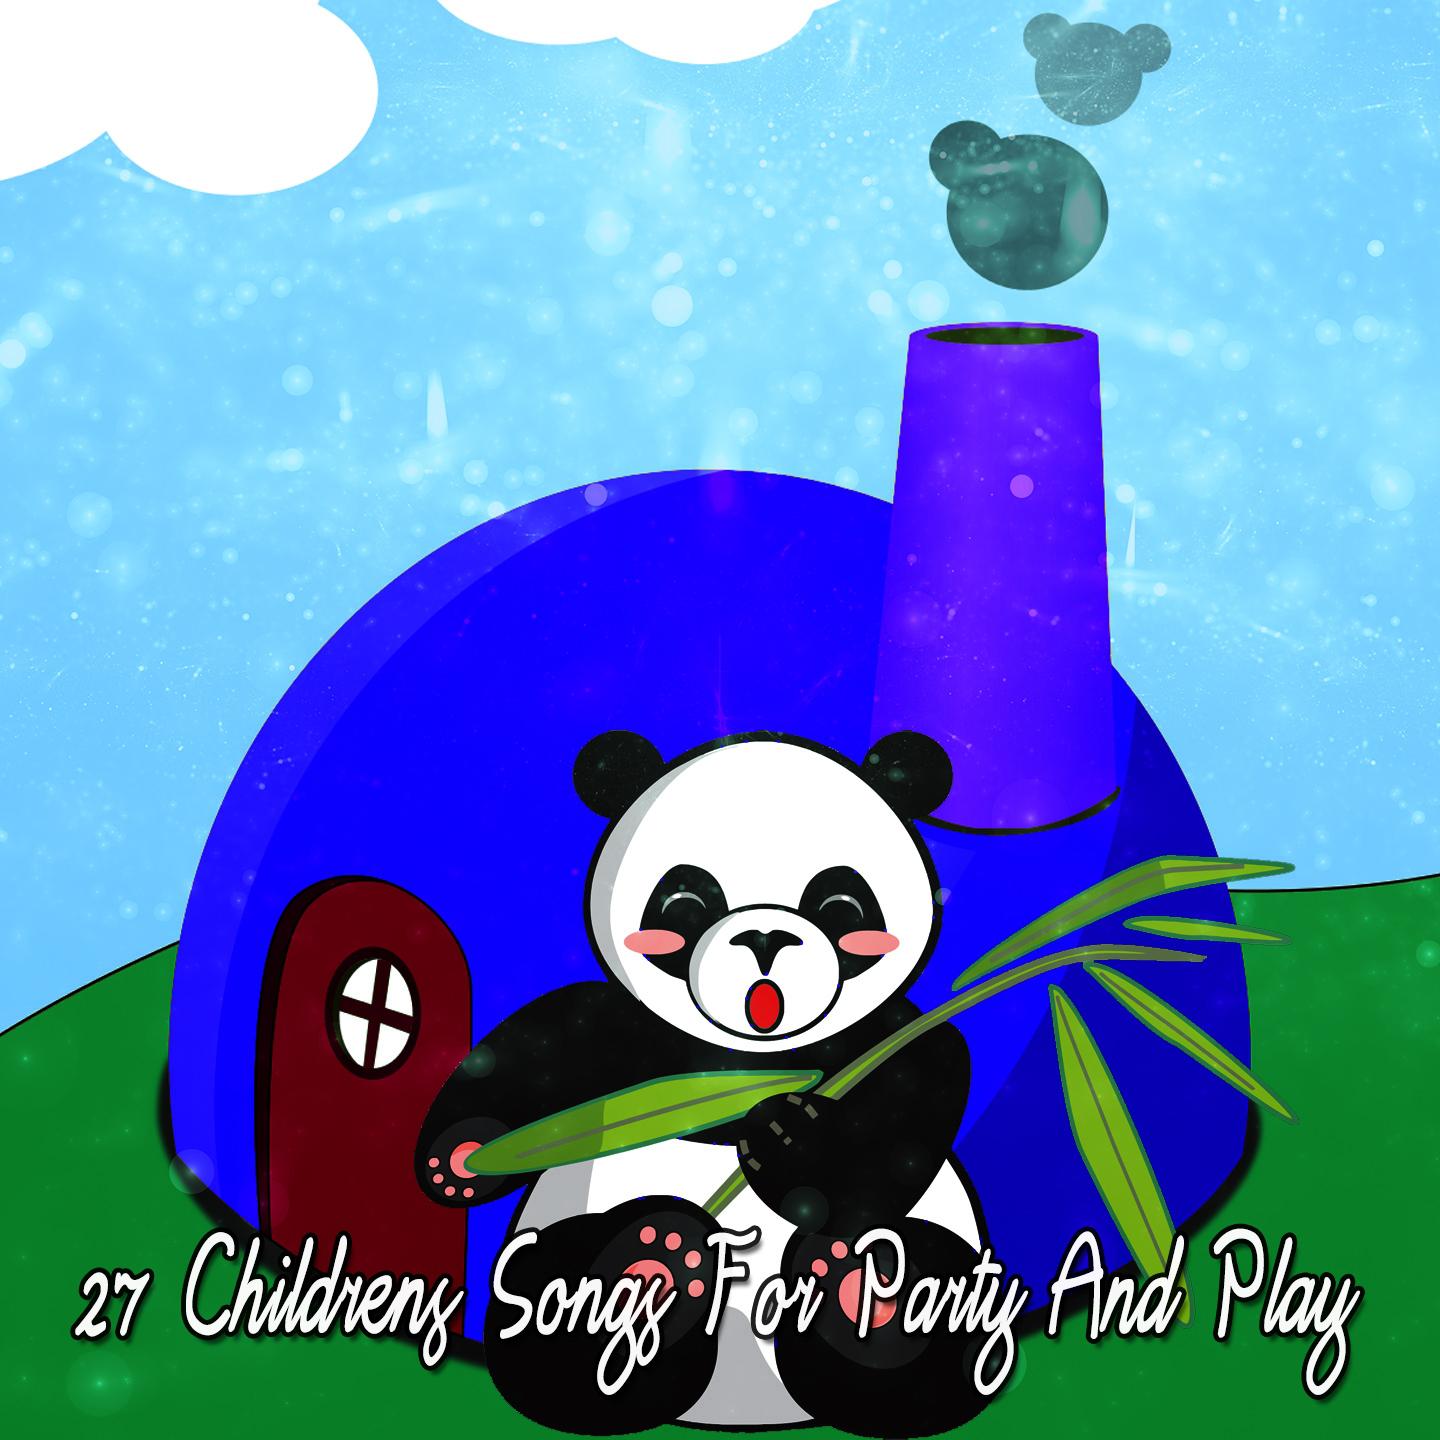 27 Childrens Songs for Party and Play